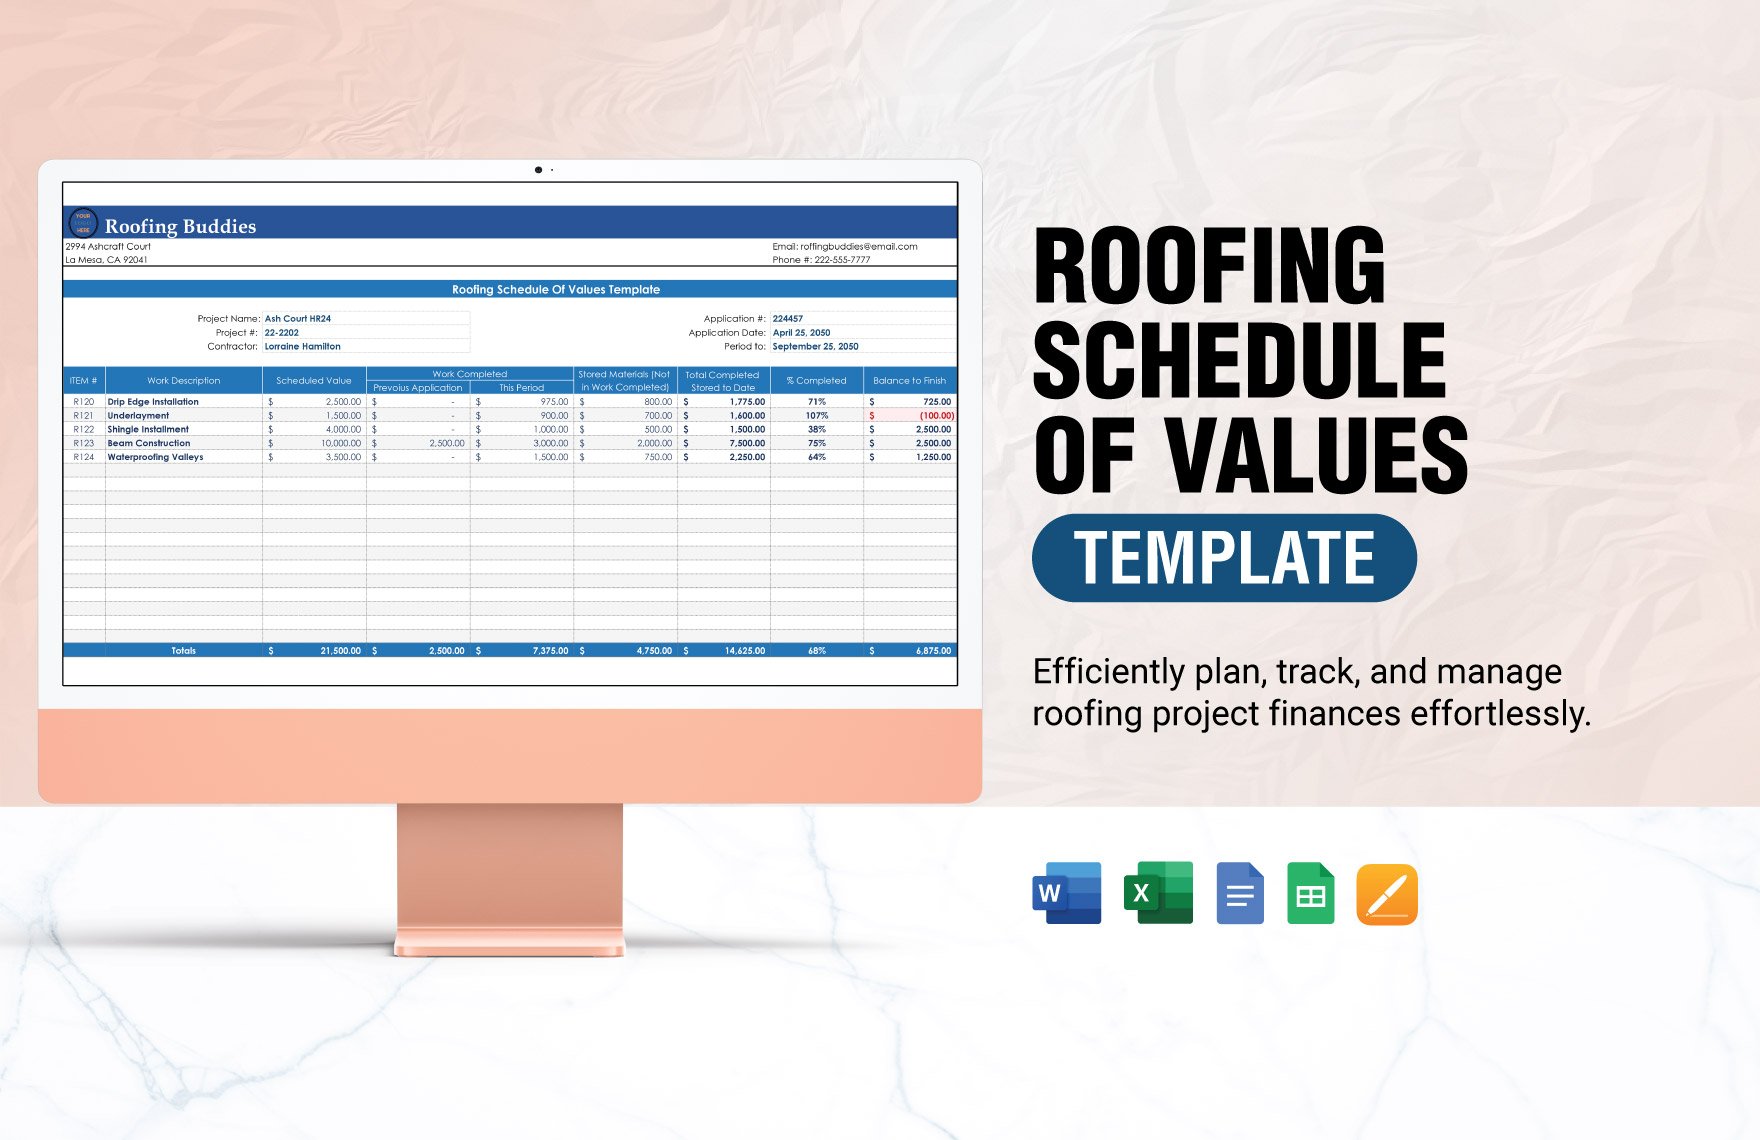 Roofing Schedule Of Values Template in Word, Google Docs, Excel, Google Sheets, Apple Pages